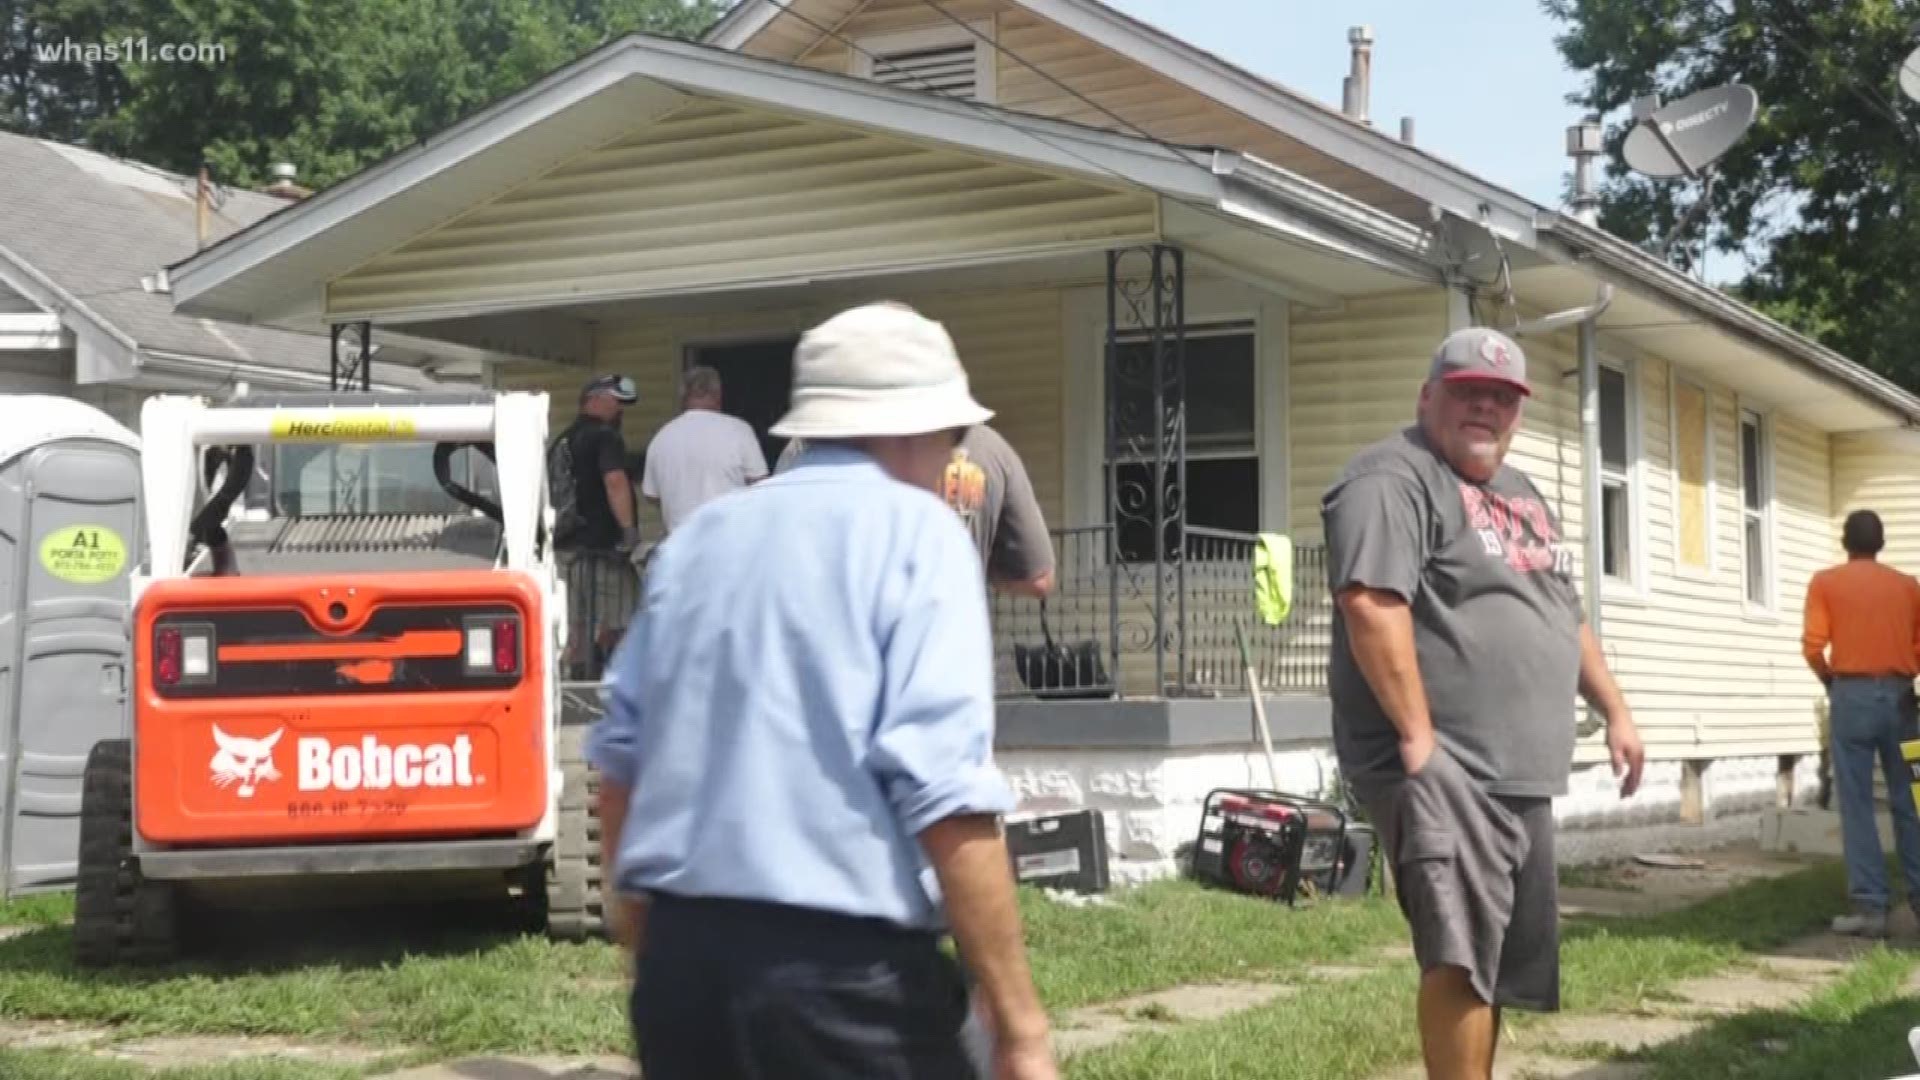 Work is underway to rehab one of Louisville's many vacant properties...and turn it into a home for a homeless veteran.
	WHAS11's Robert Bradfield is shedding light on a program that's giving back in more ways than one.

